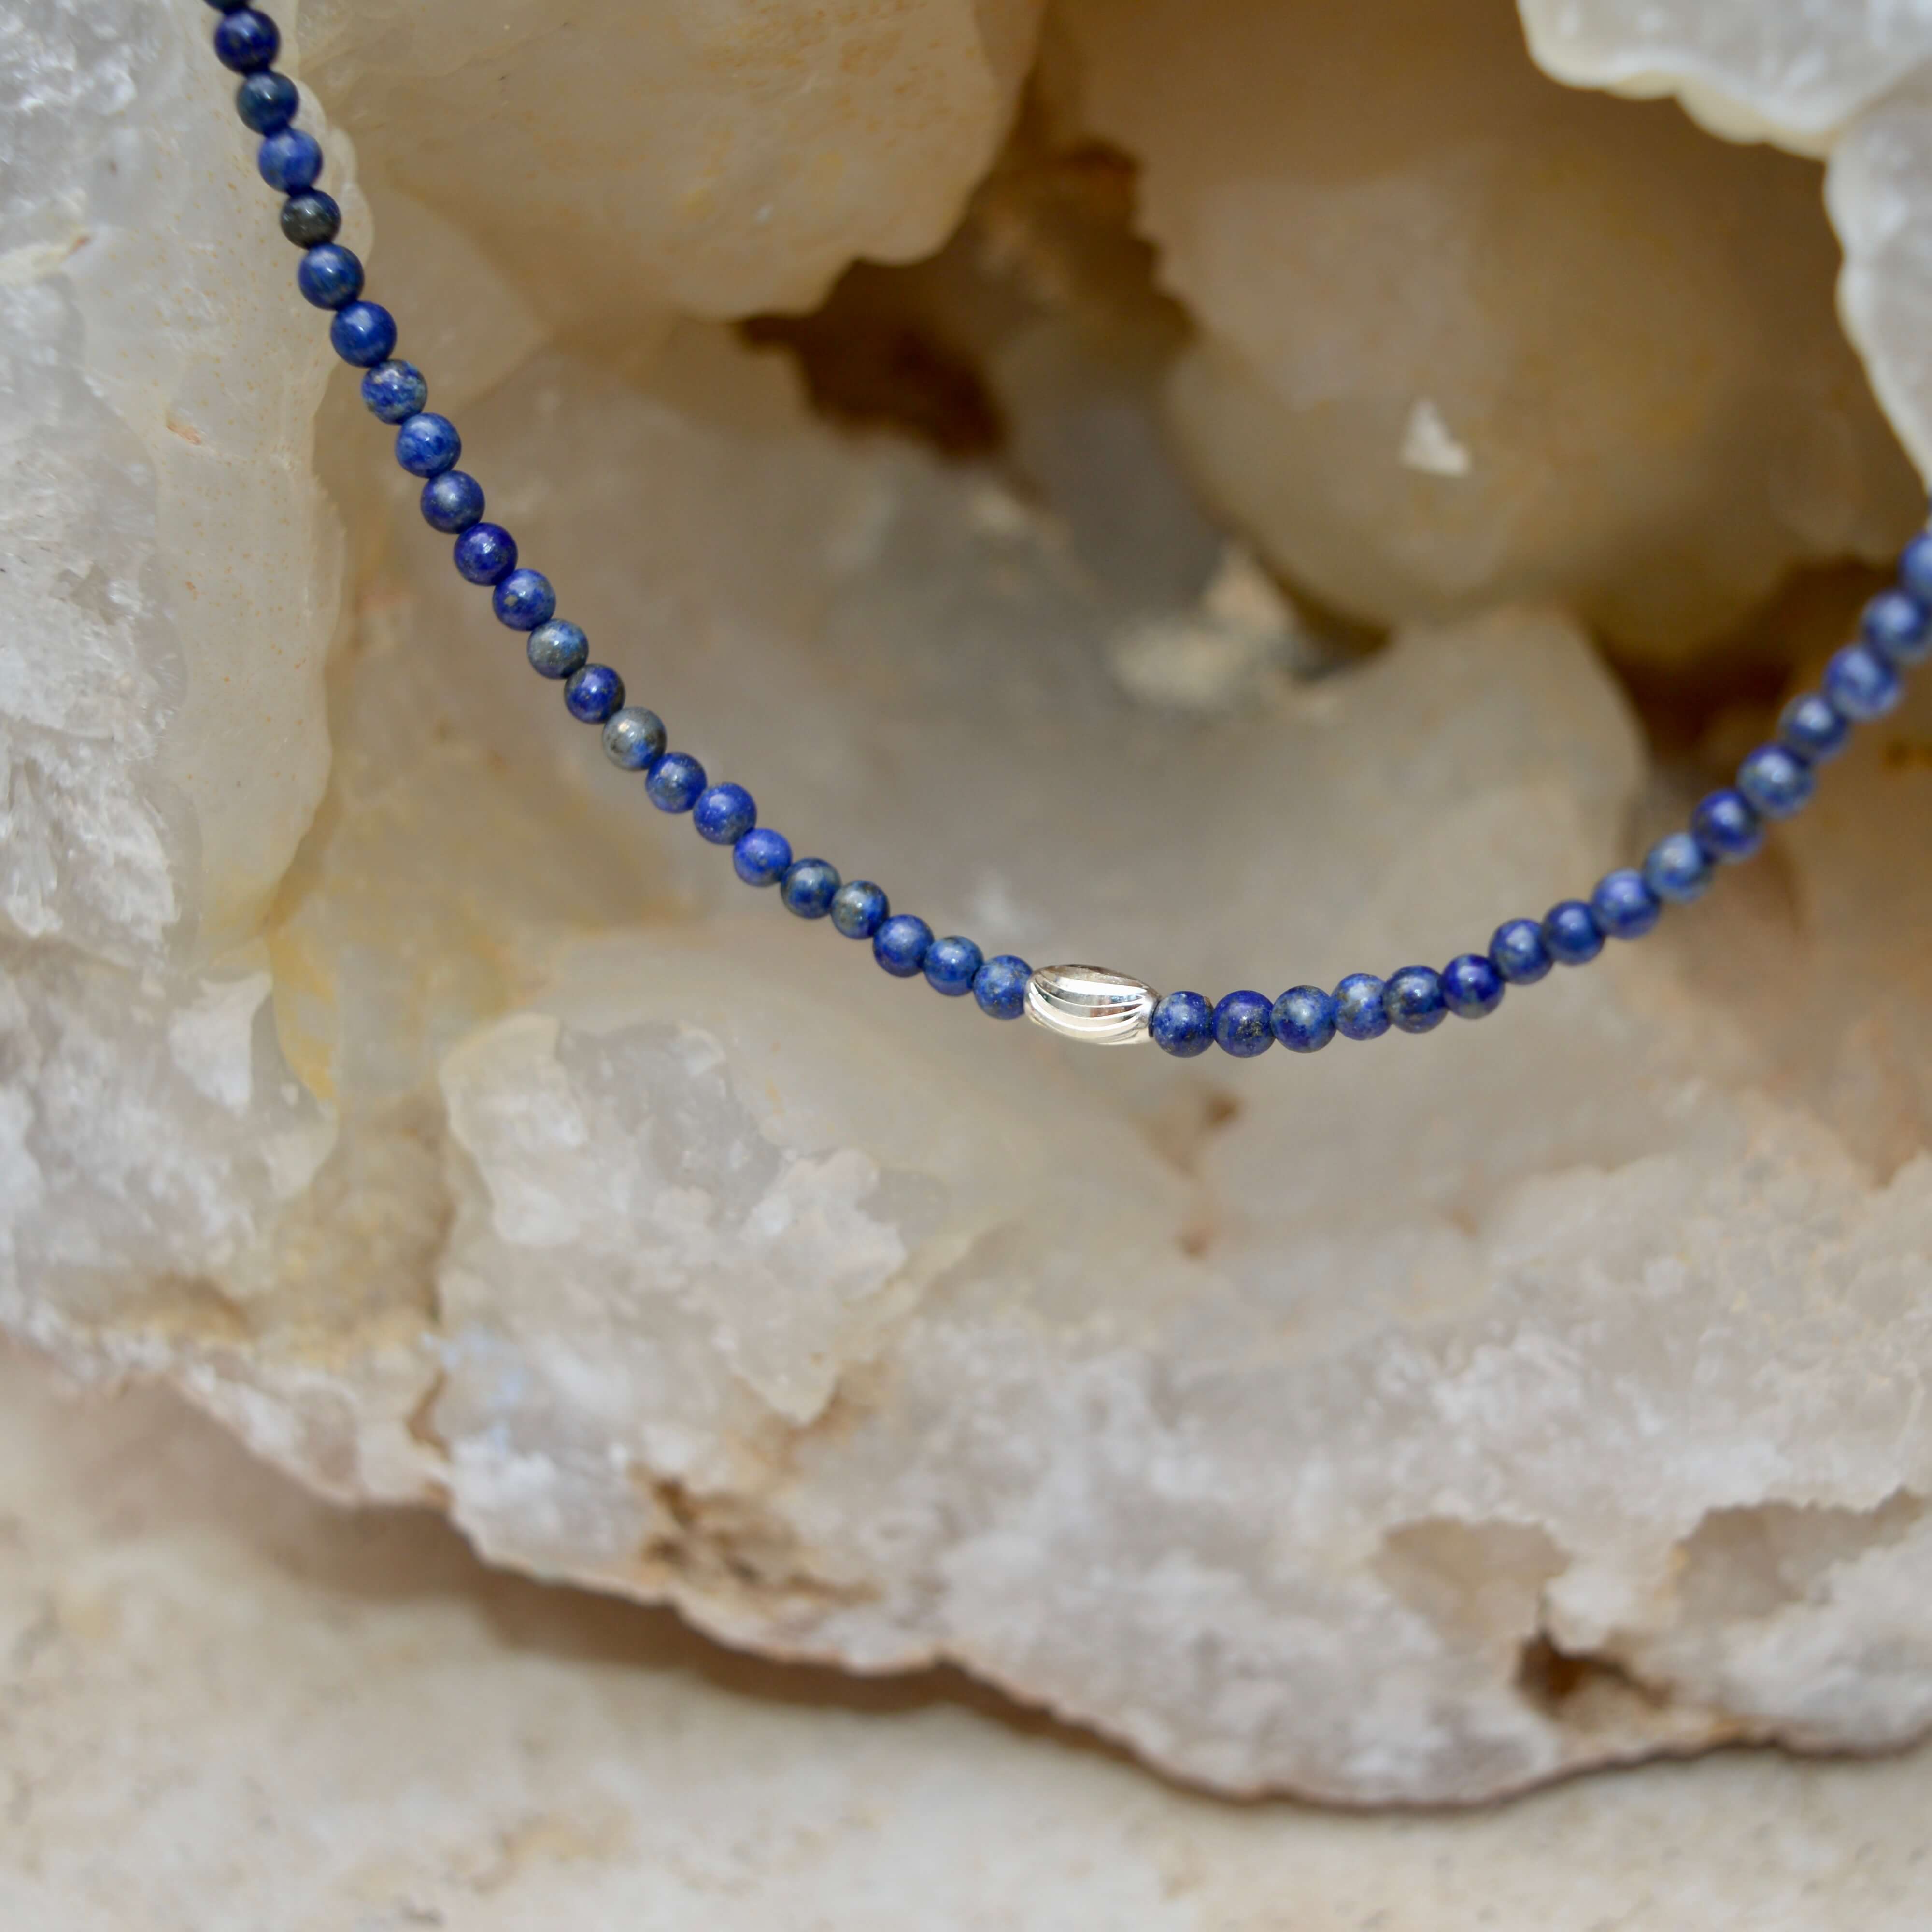 THE DAINTY-Silver- Lapis Lazuli- NECKLACE - Headless Nation